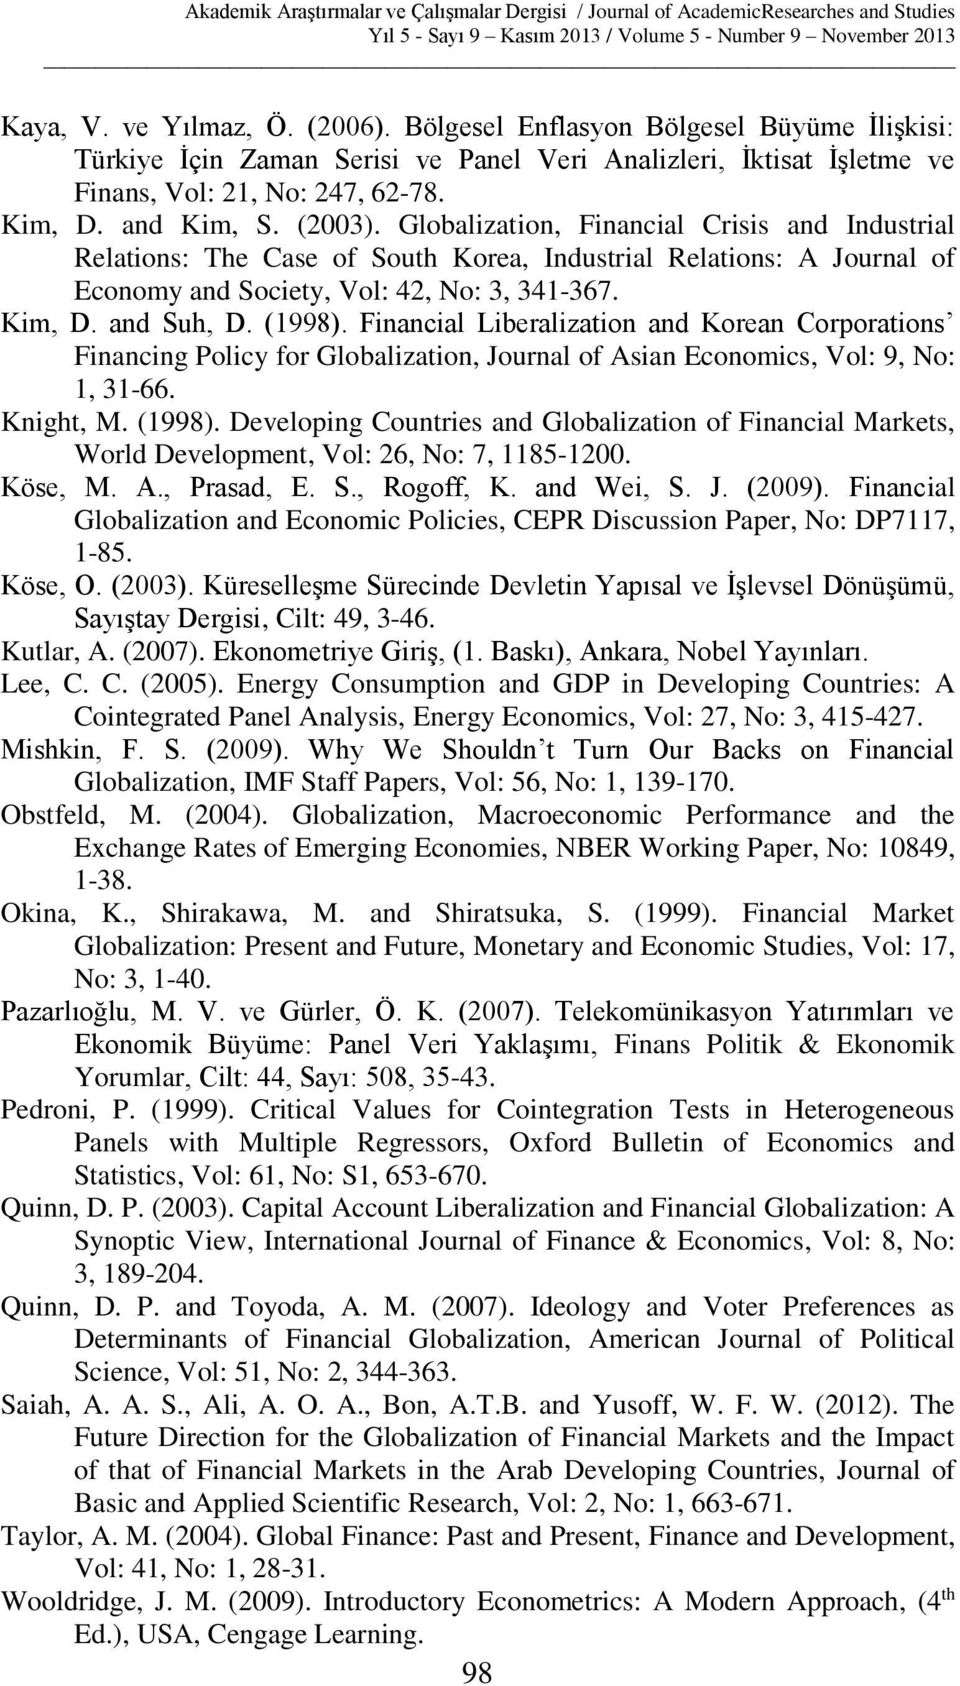 Financial Liberalization and Korean Corporations Financing Policy for Globalization, Journal of Asian Economics, Vol: 9, No: 1, 31-66. Knight, M. (1998).